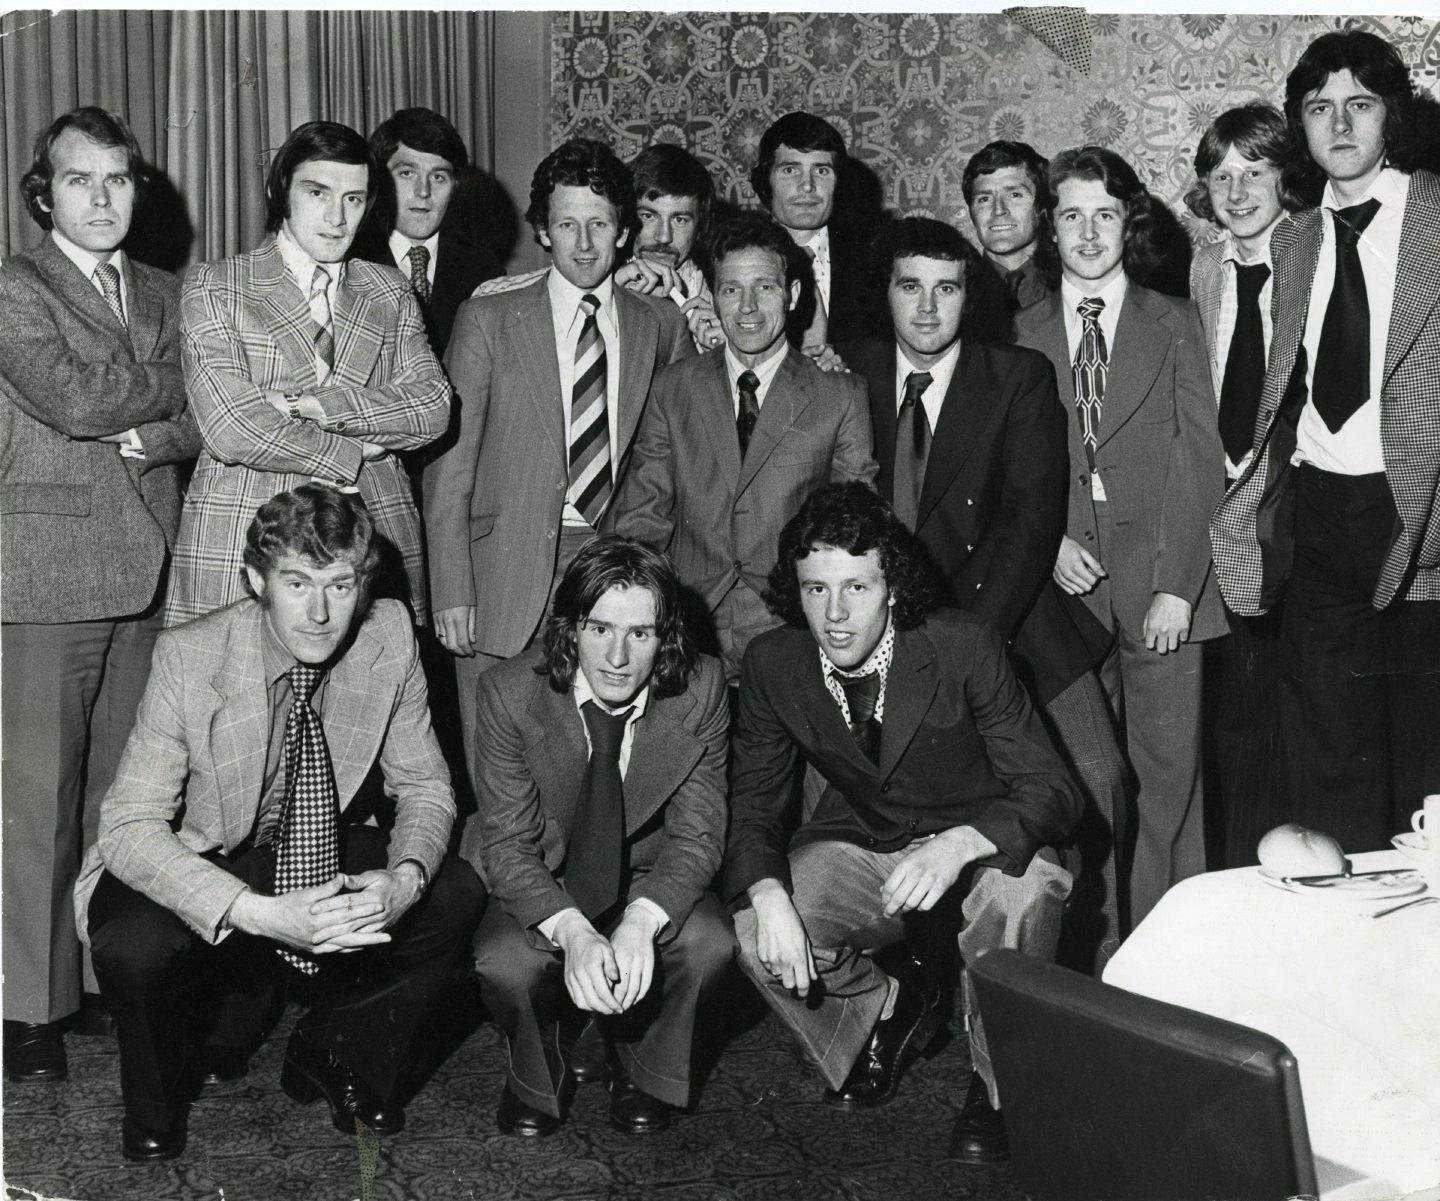 The United squad line-up in the Angus Hotel after returning from the Scottish Cup Final defeat to Celtic in 1974.